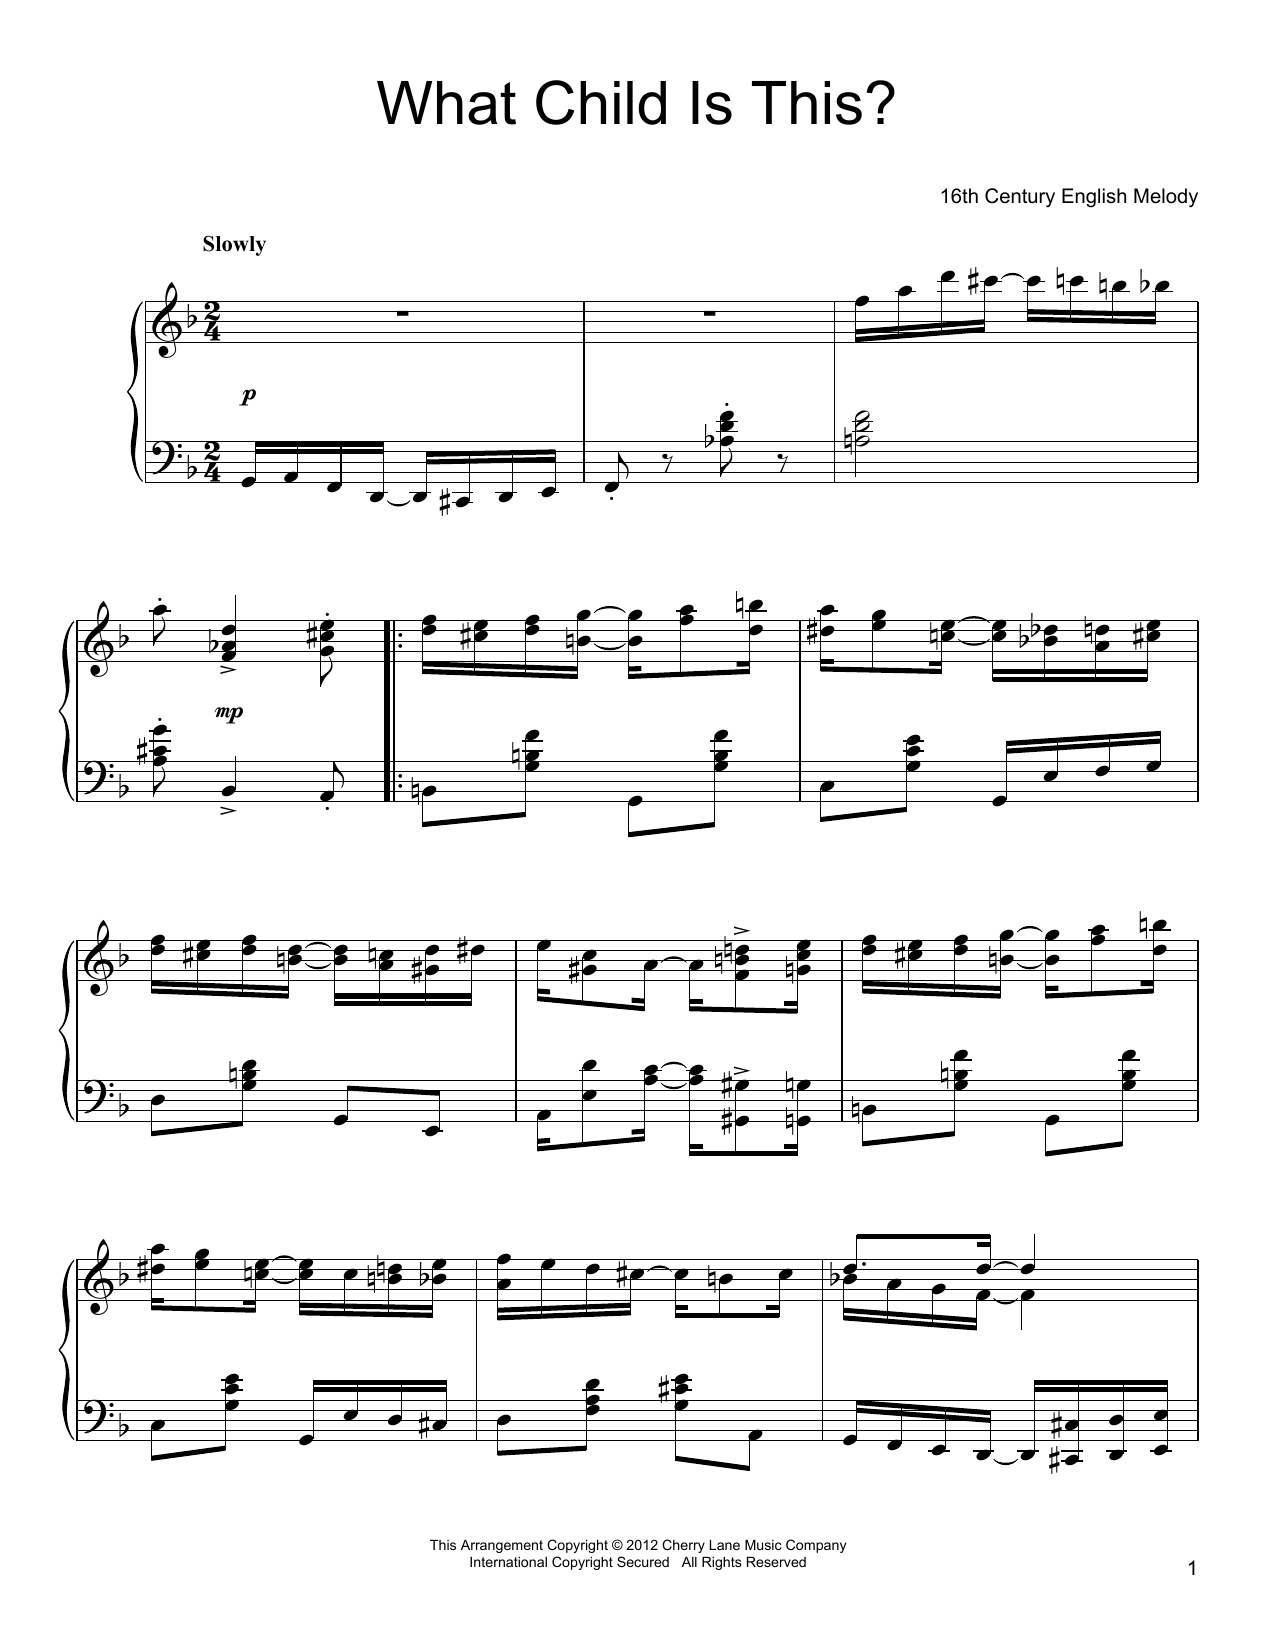 16th Century English Melody What Child Is This Sheet Music Download Printable Christmas Pdf Score How To Play On Flute Duet Sku